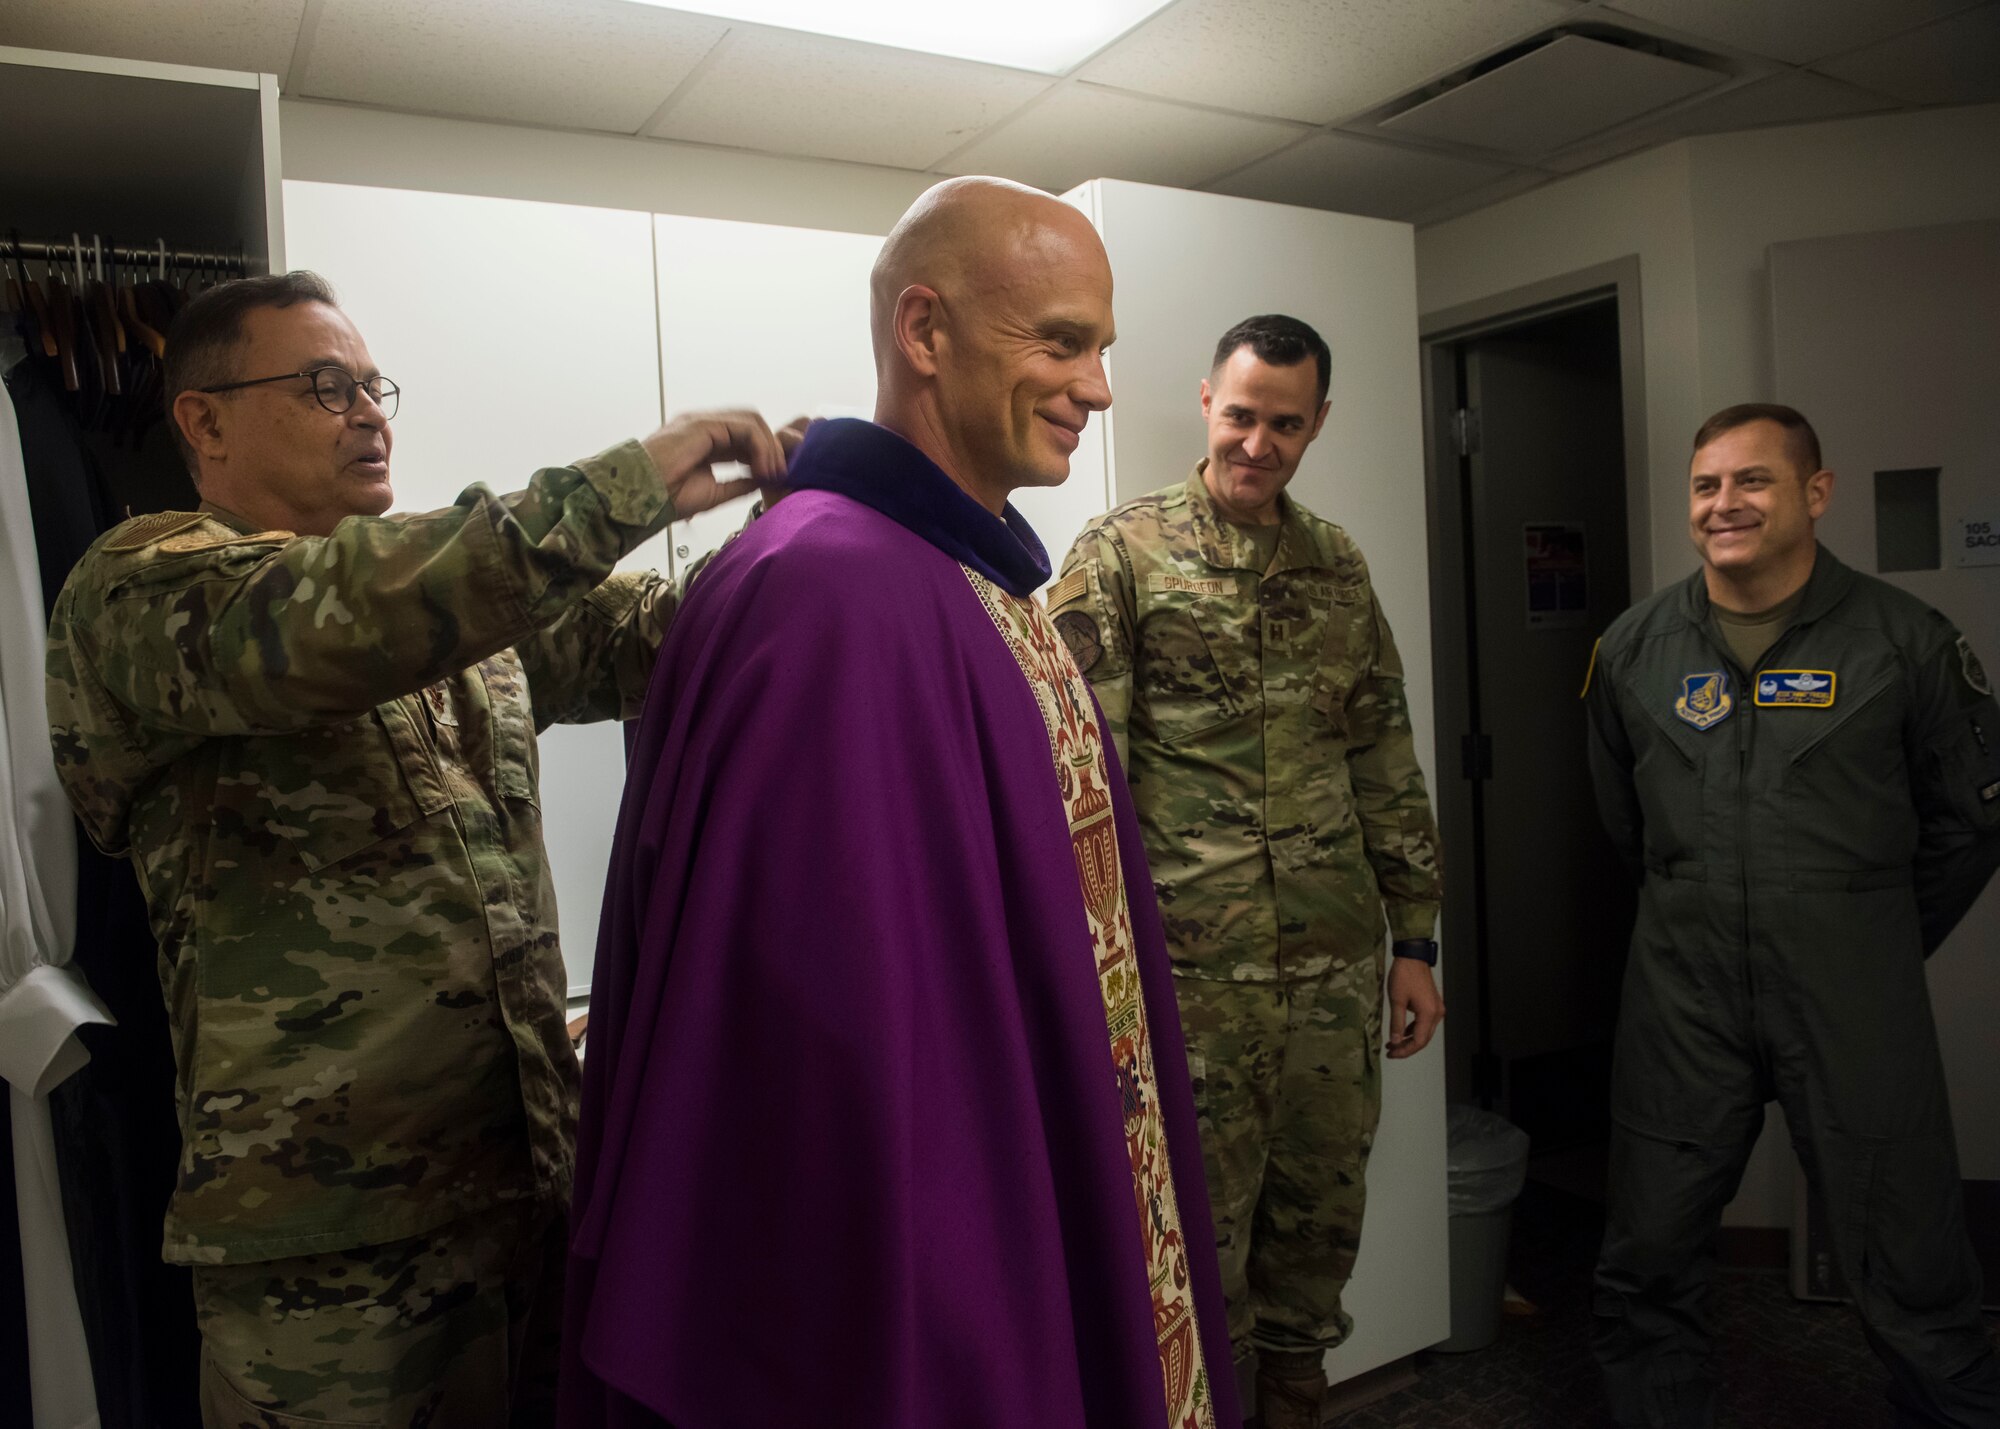 Military members help place religious robes onto each other.